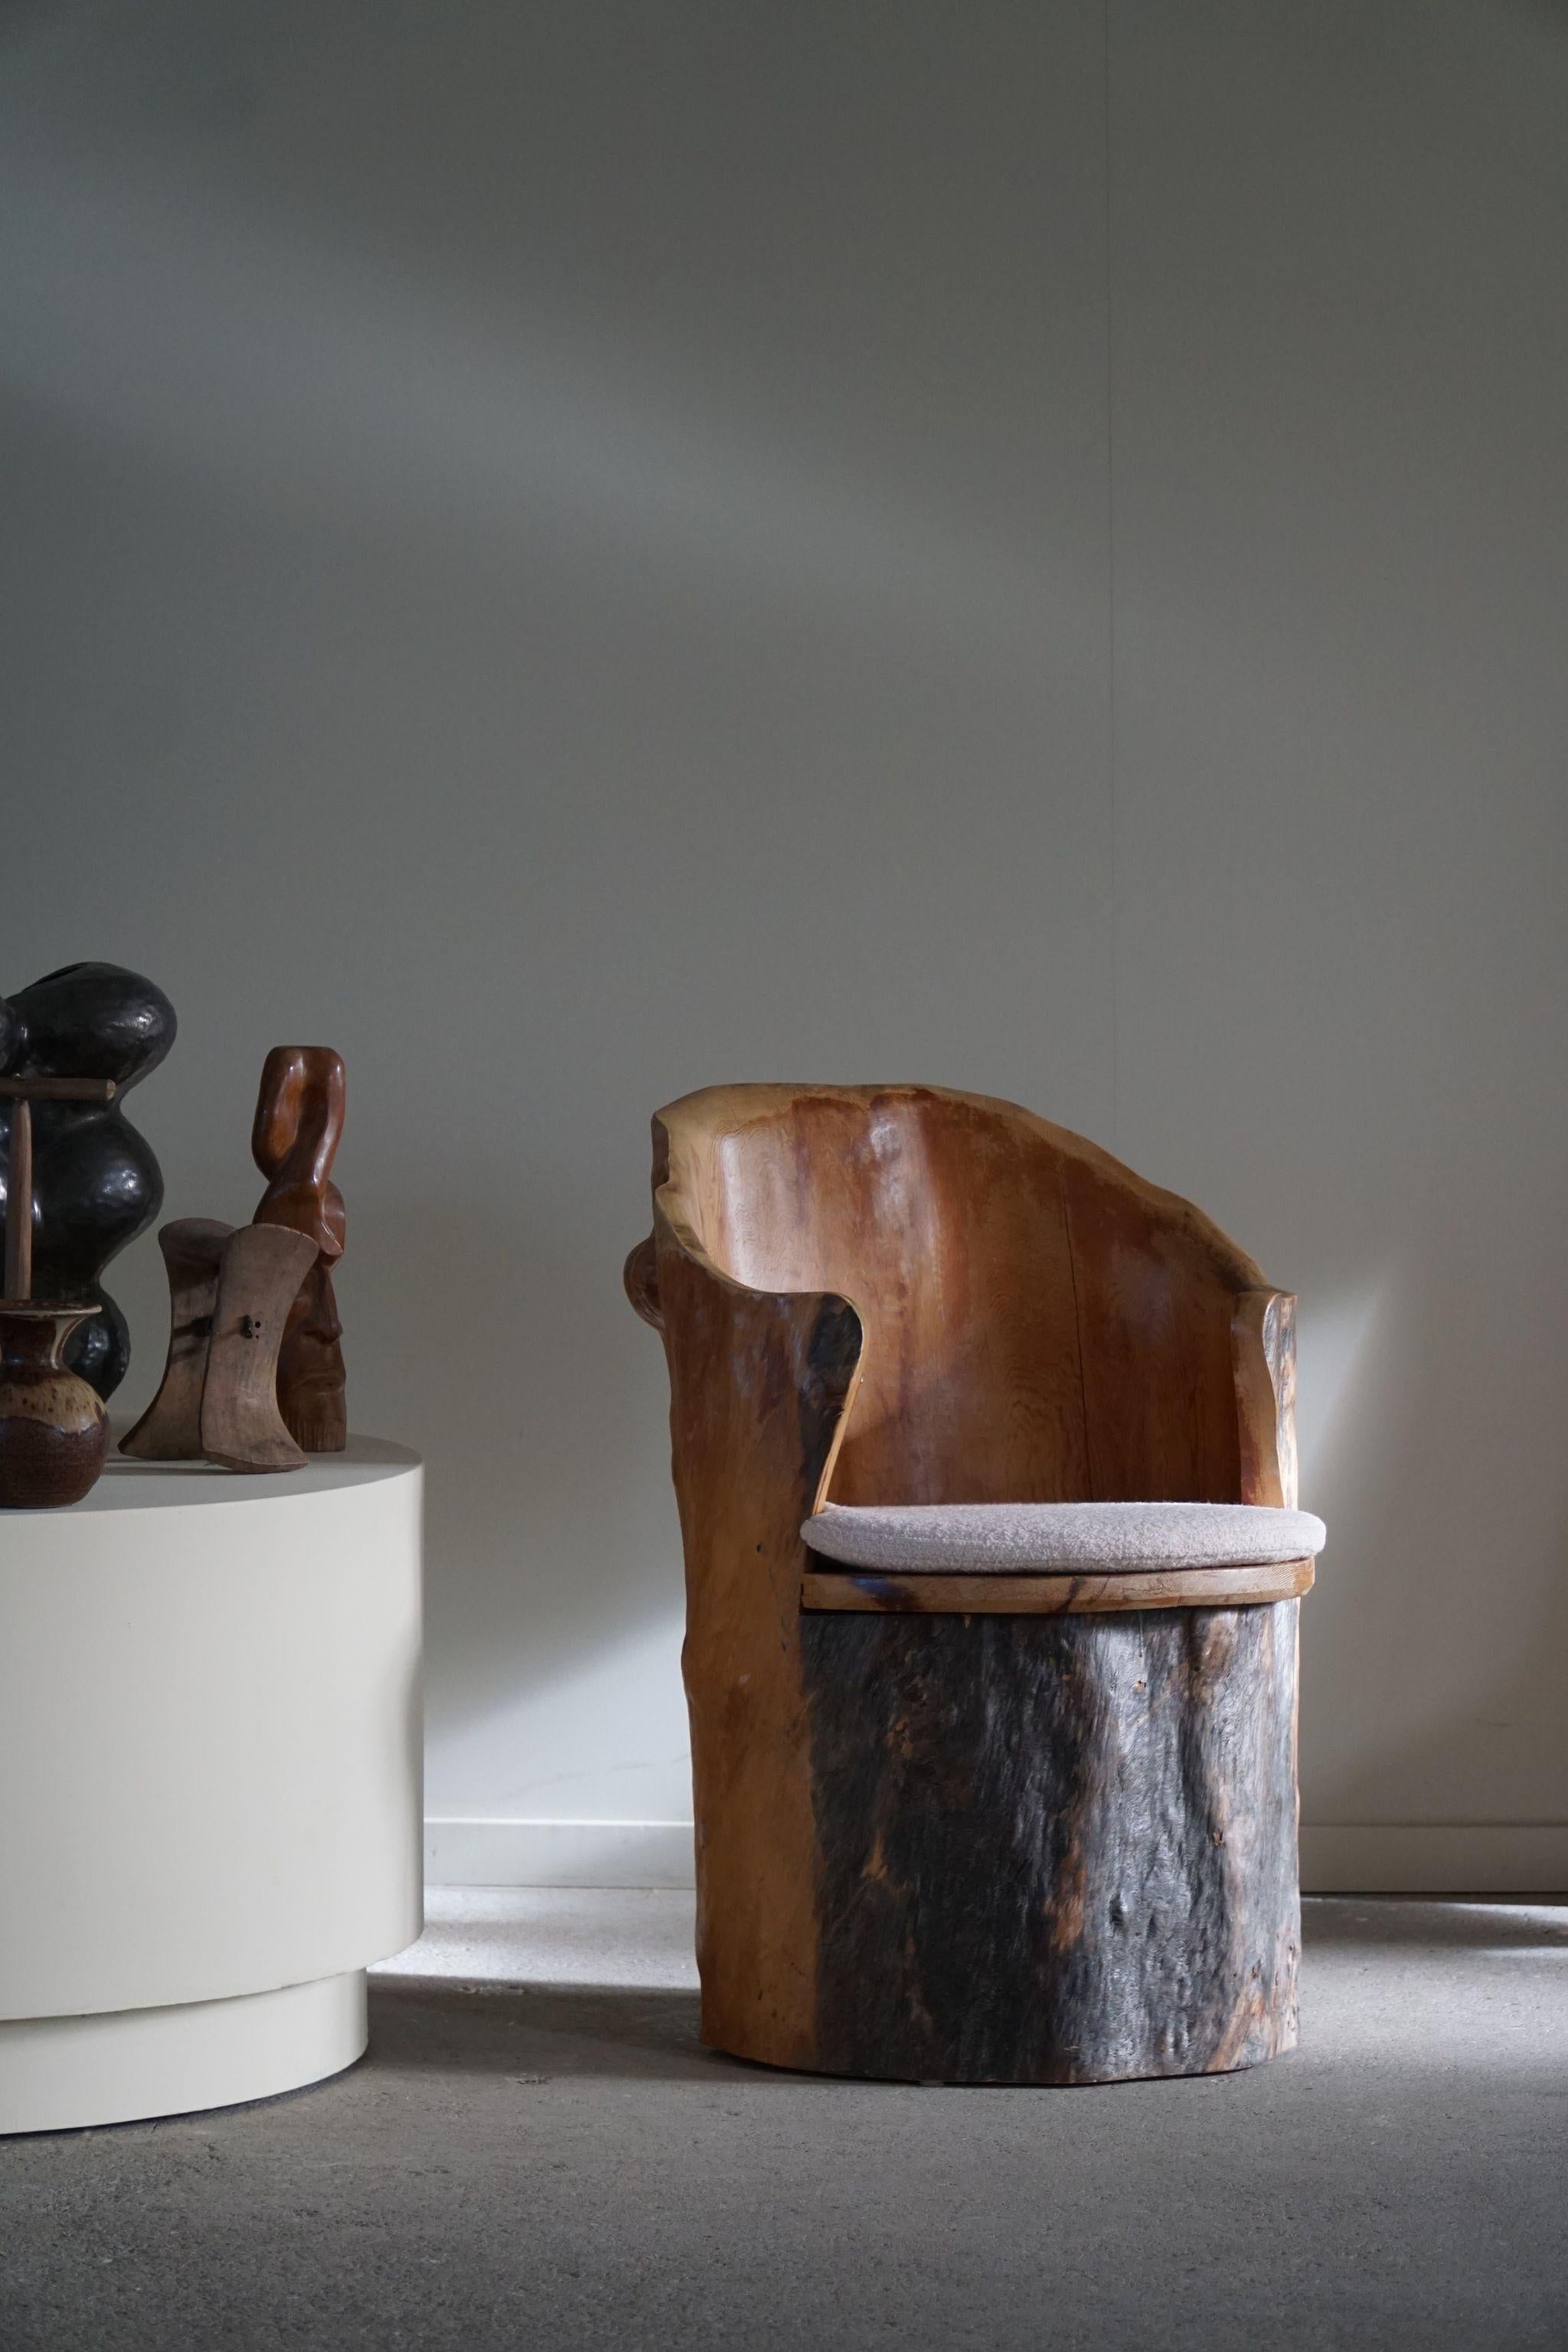 A highly decorative and sculptural stump chair made in solid pine. Hand carved by a Swedish cabinetmaker in the 1970s. Beautiful wood grains and patina in this vintage piece, a truly authentic brutalist piece. Seating in reupholstered bouclé, Tiree